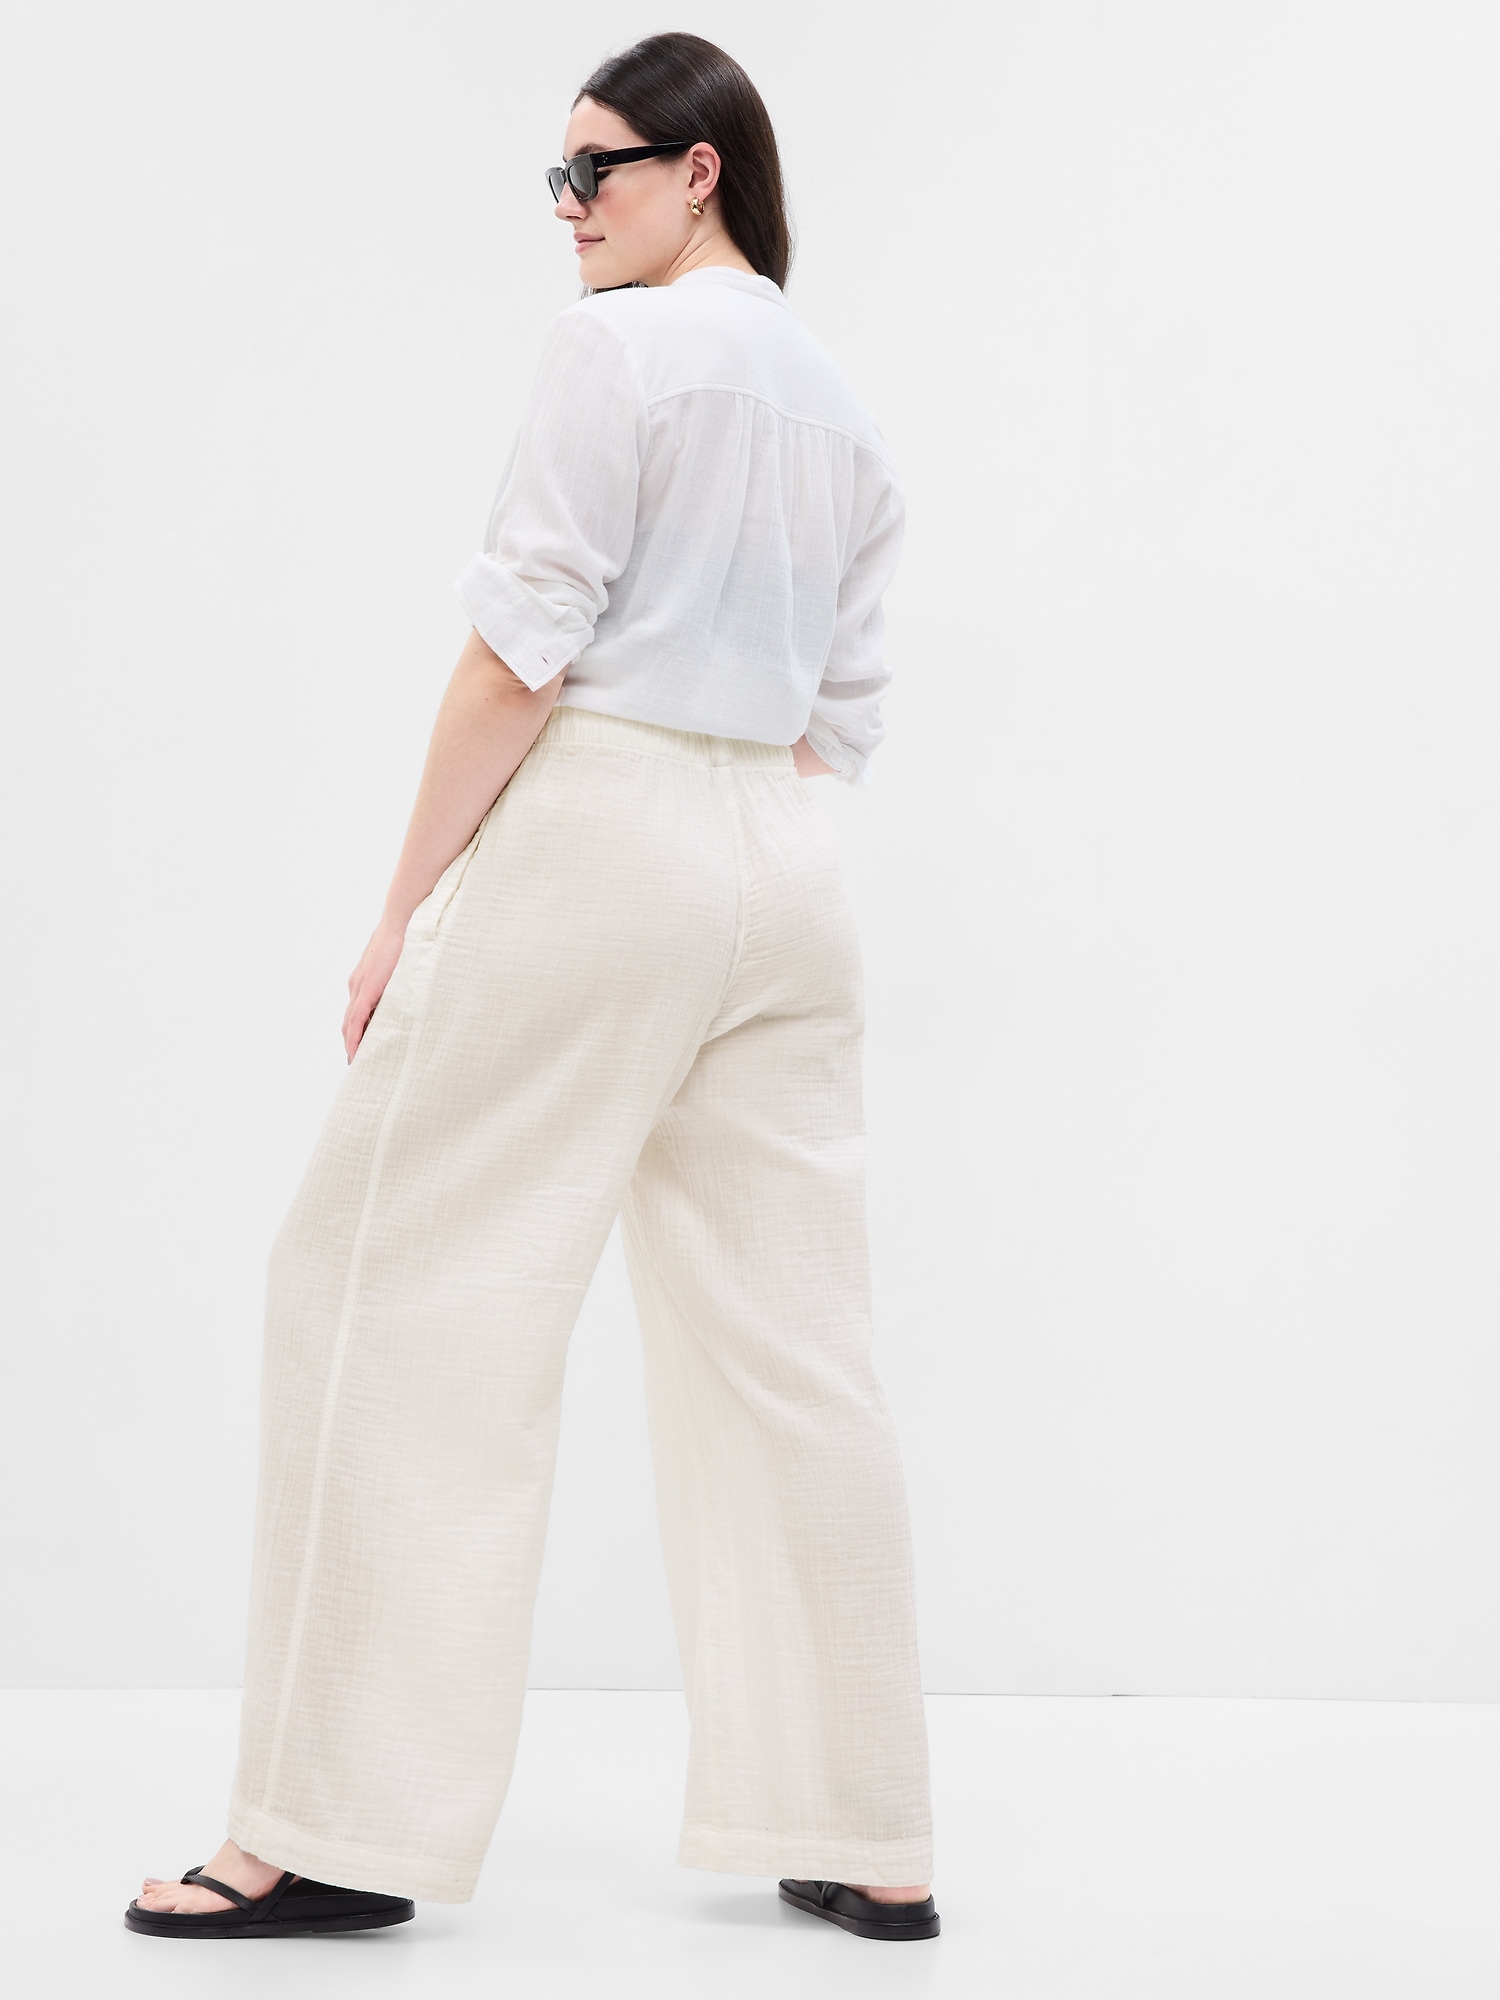 9 Easy Outfits Ft. Gap's Crinkle Gauze Wide-Leg Pants - The Mom Edit